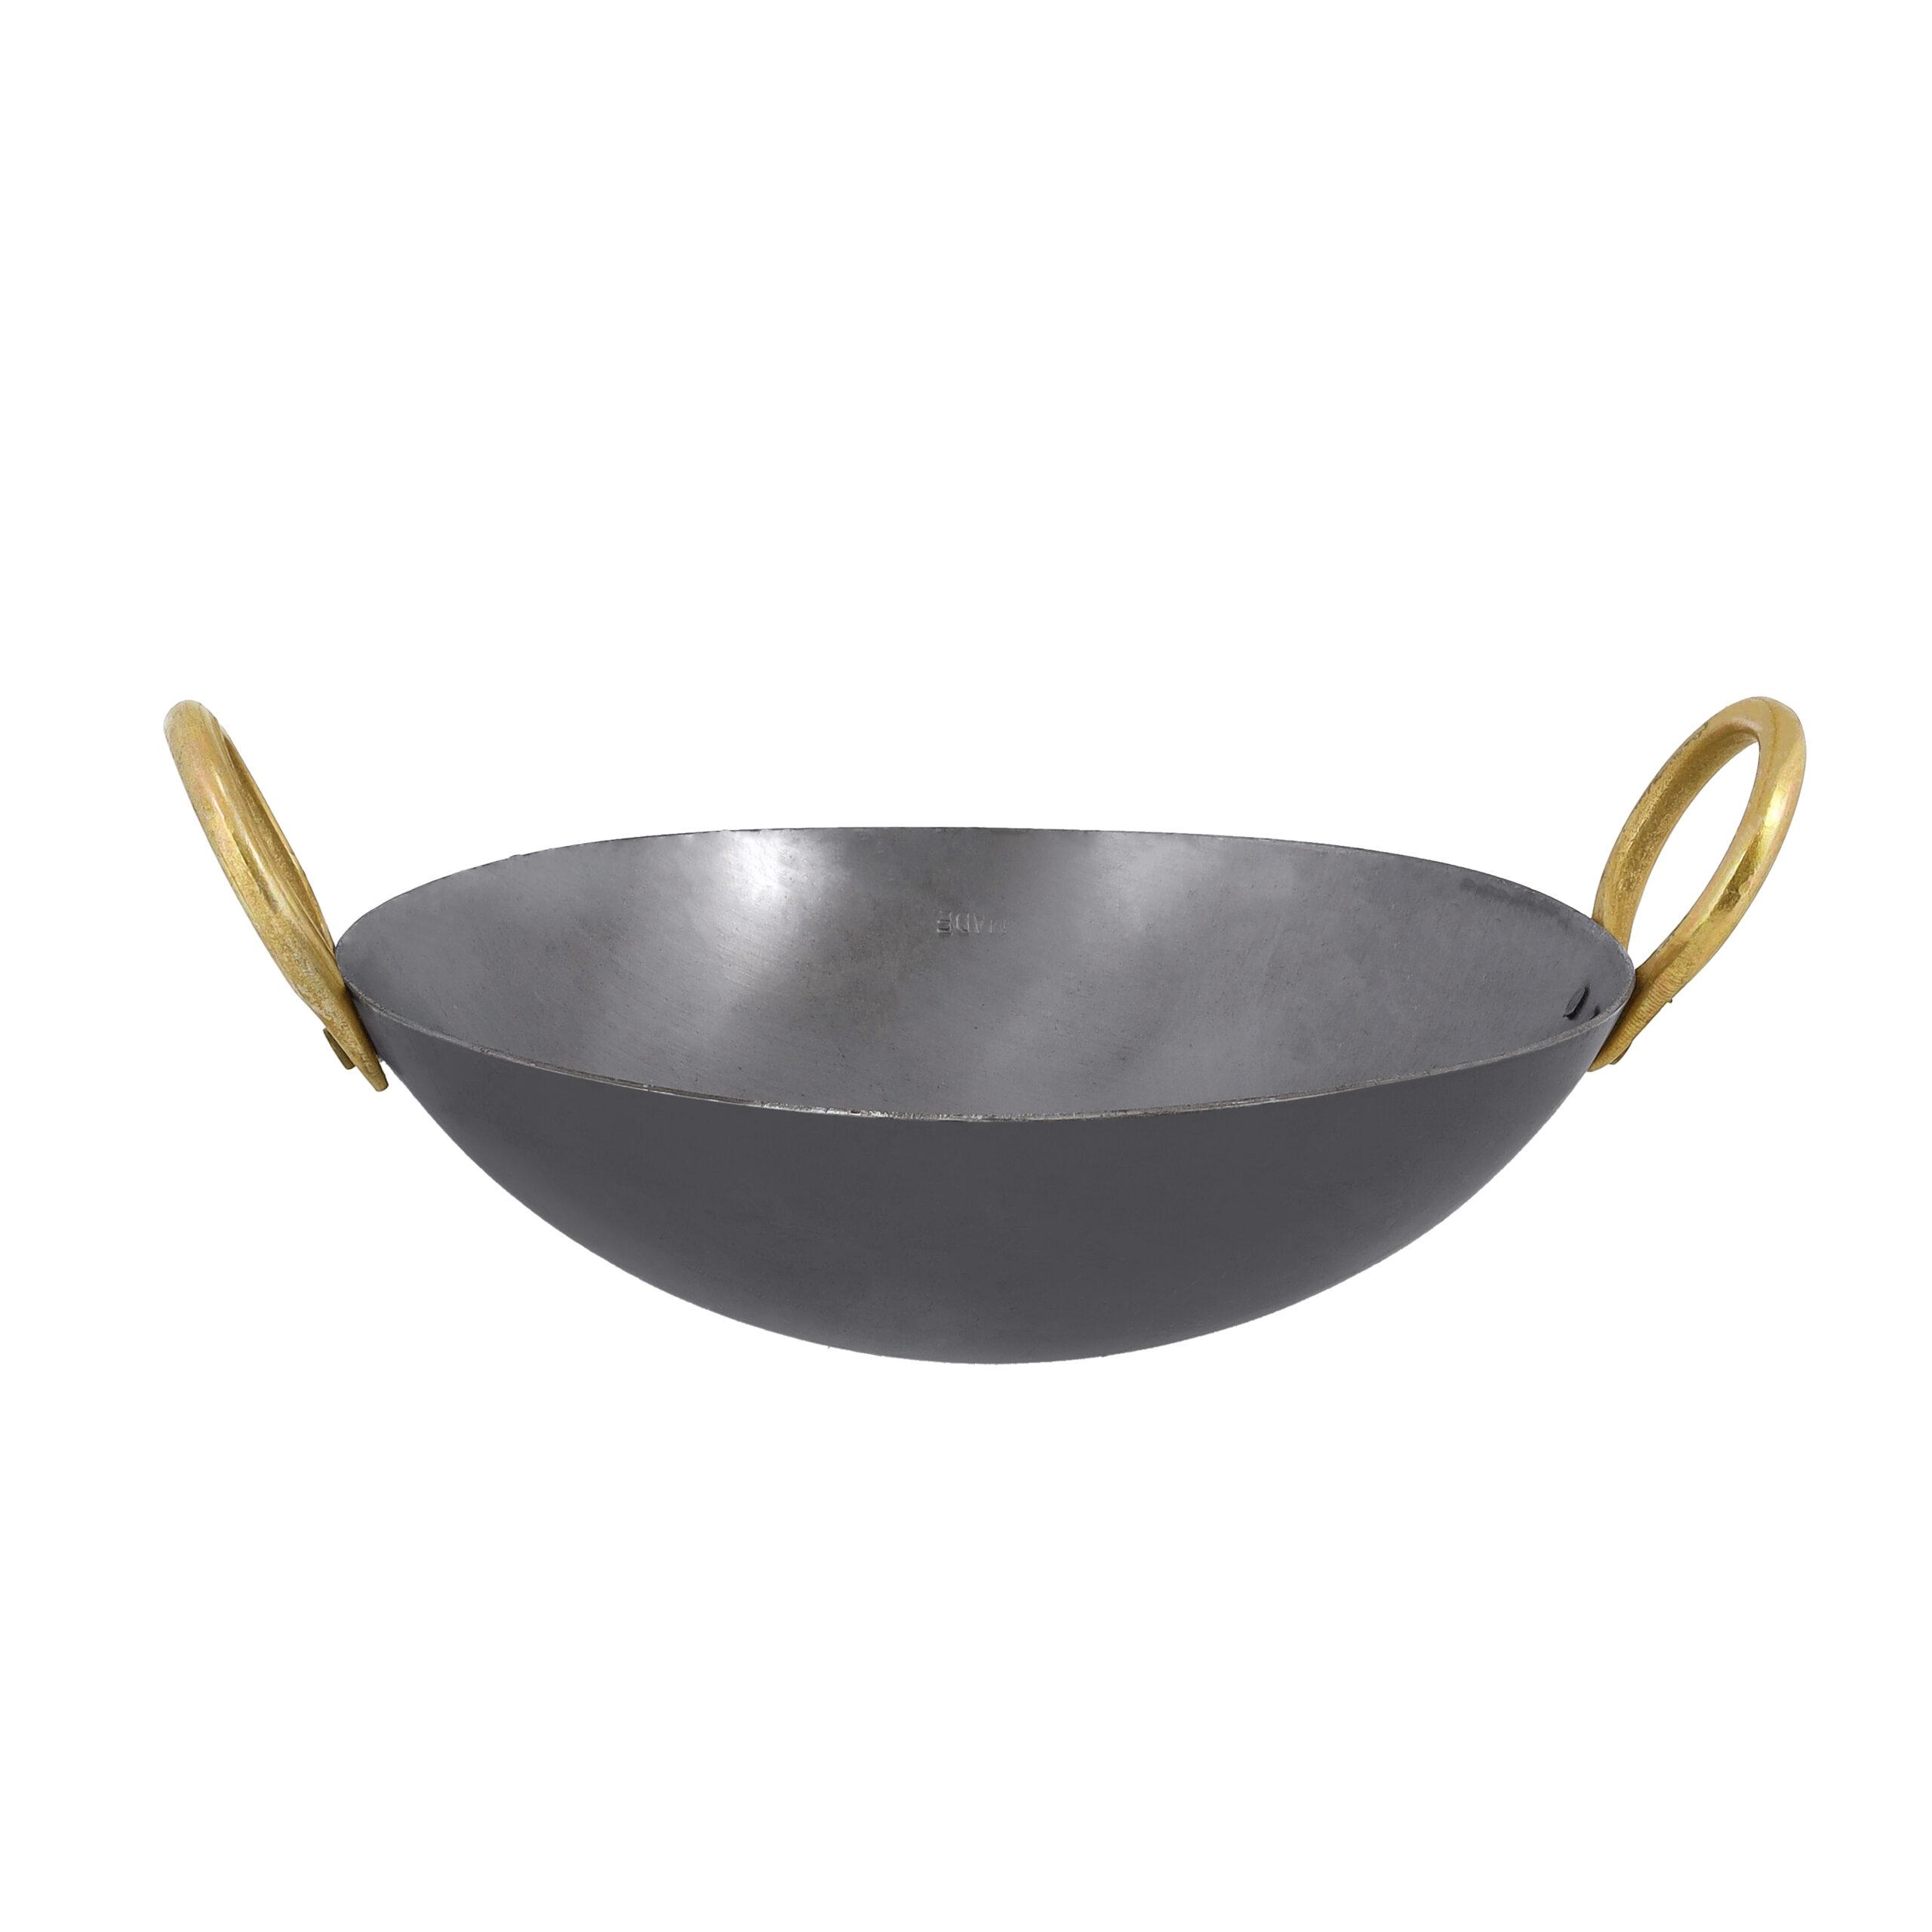 Delcasa Iron Kadai with Deep Round Bottom and Strong Handle | DC1989 | Traditional 23 cm Deep Frying Kadai | Ideal for Home Cooking, Restaurant Kitchen and Catering